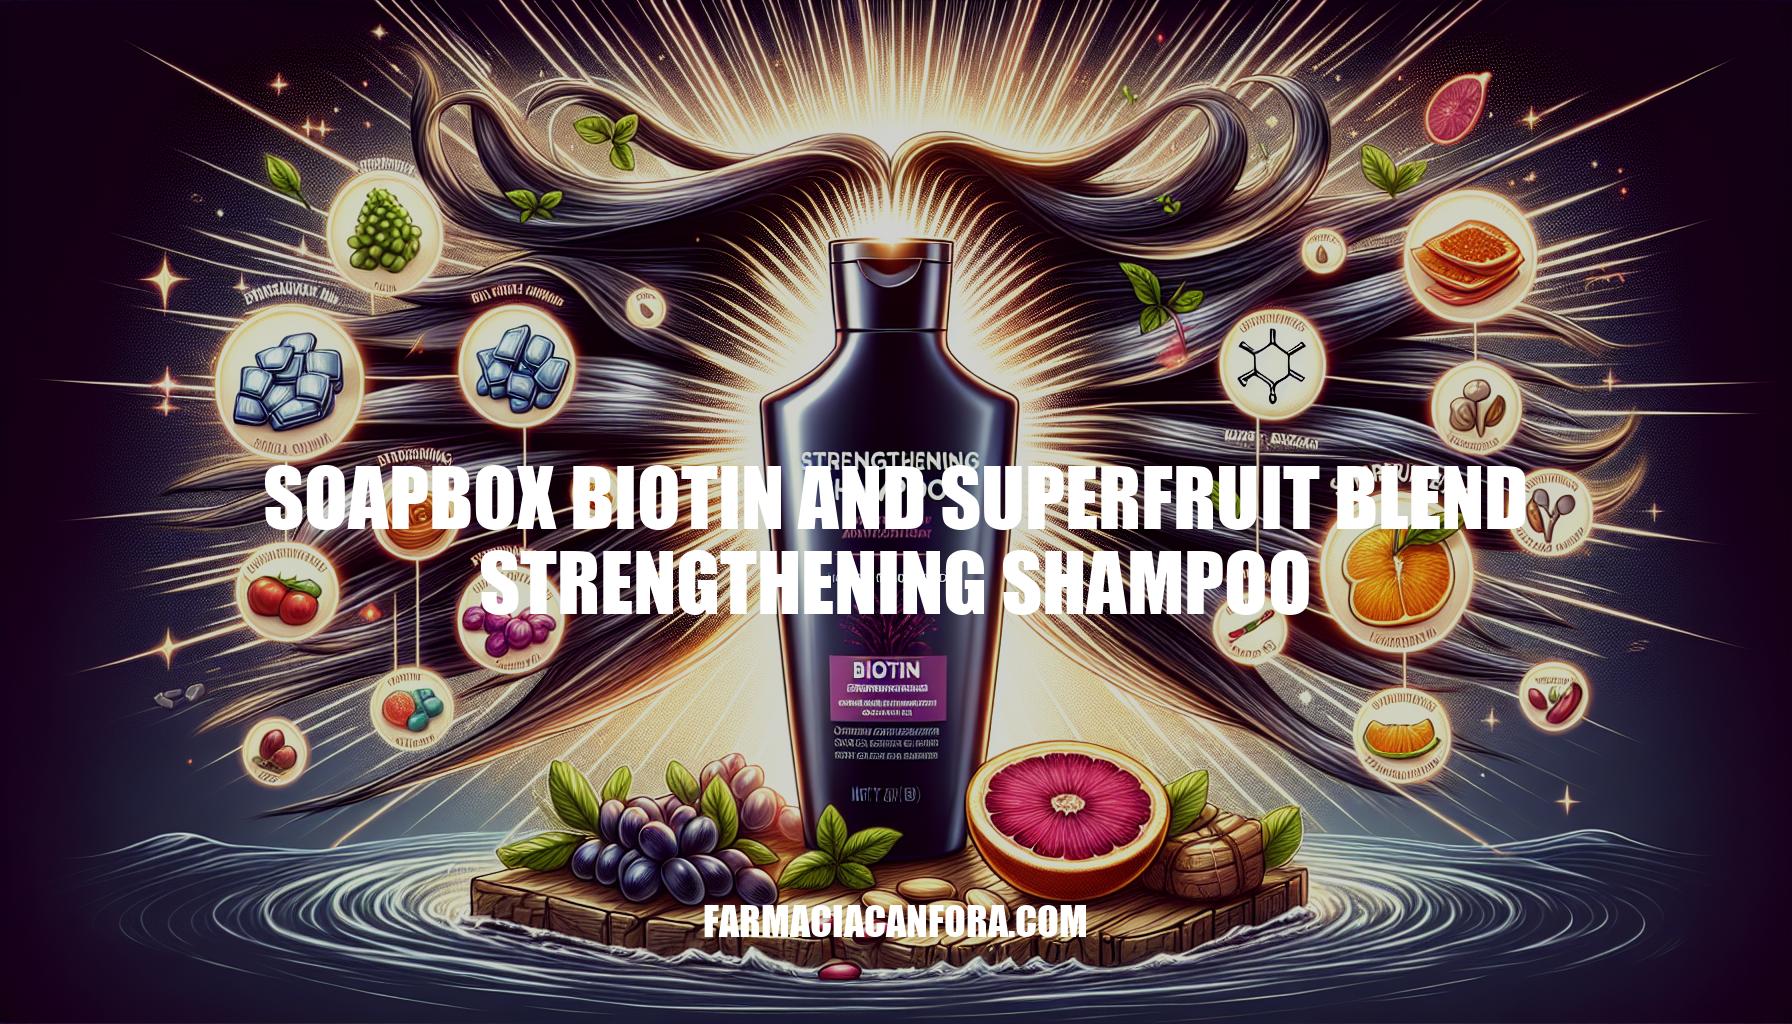 Discover the Benefits of Soapbox Biotin and Superfruit Blend Strengthening Shampoo